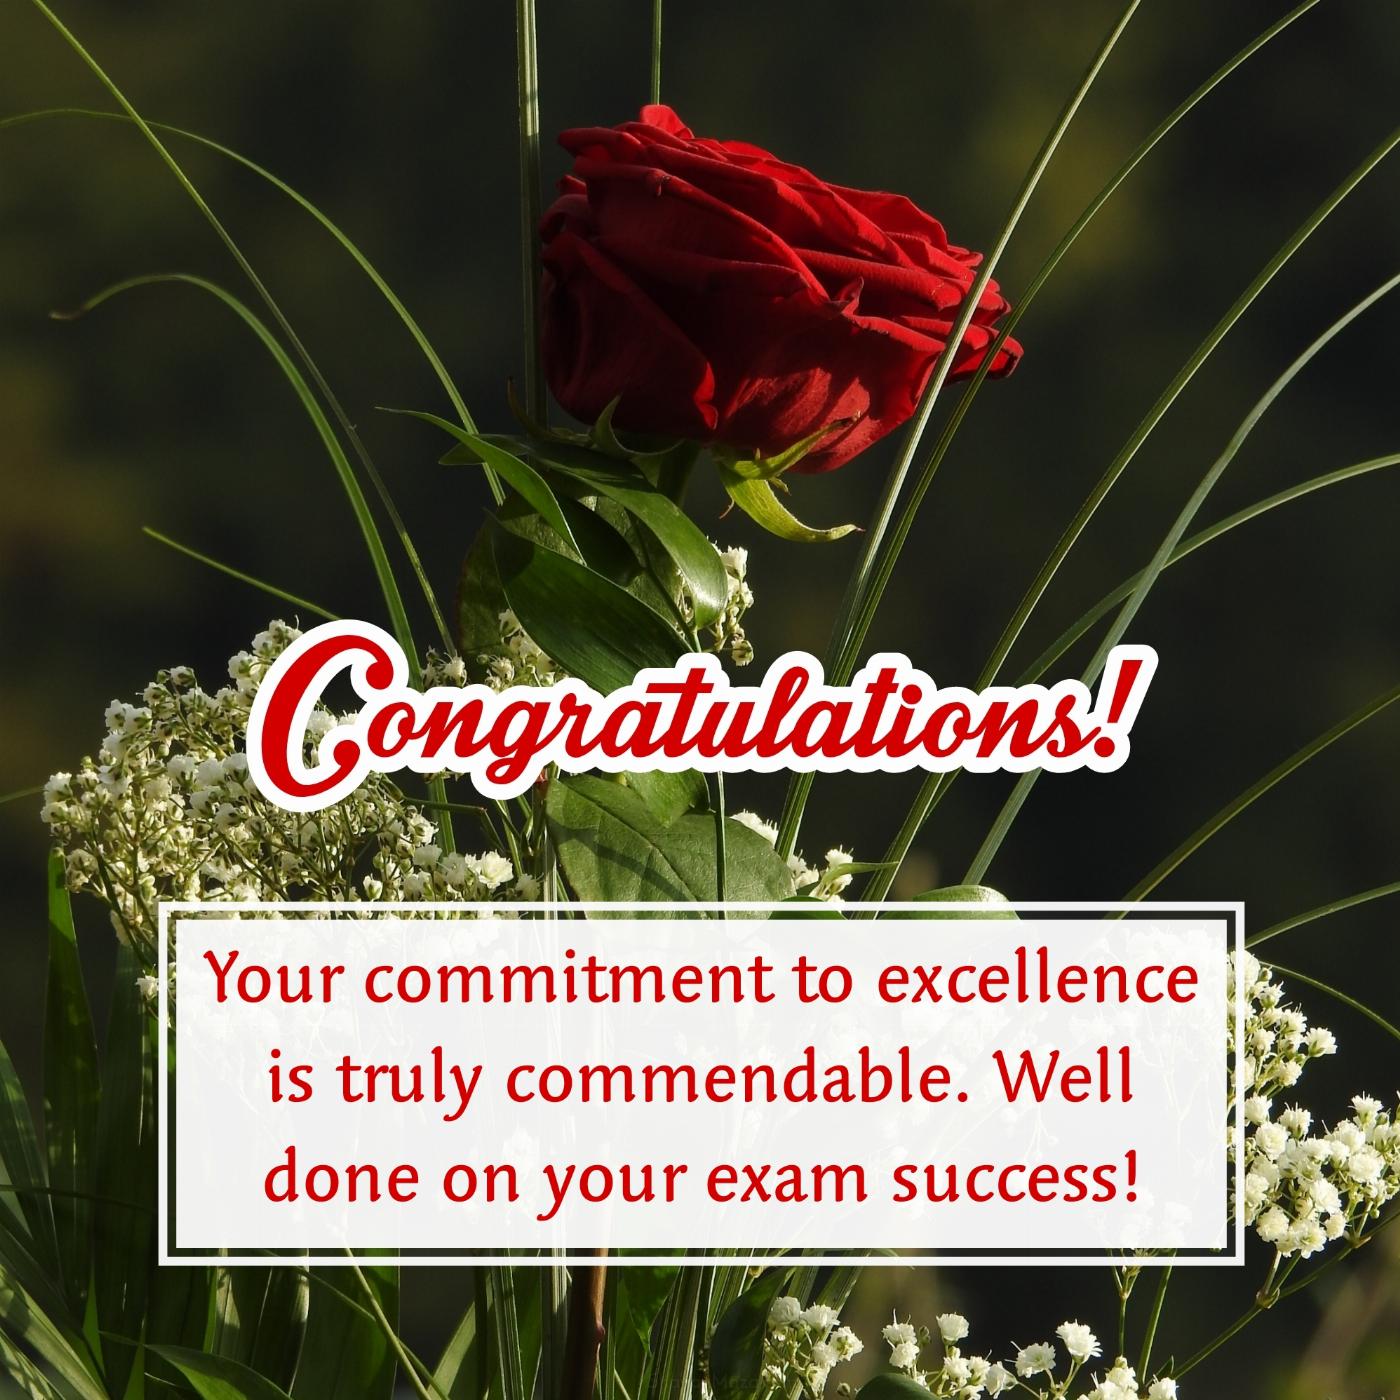 Your commitment to excellence is truly commendable